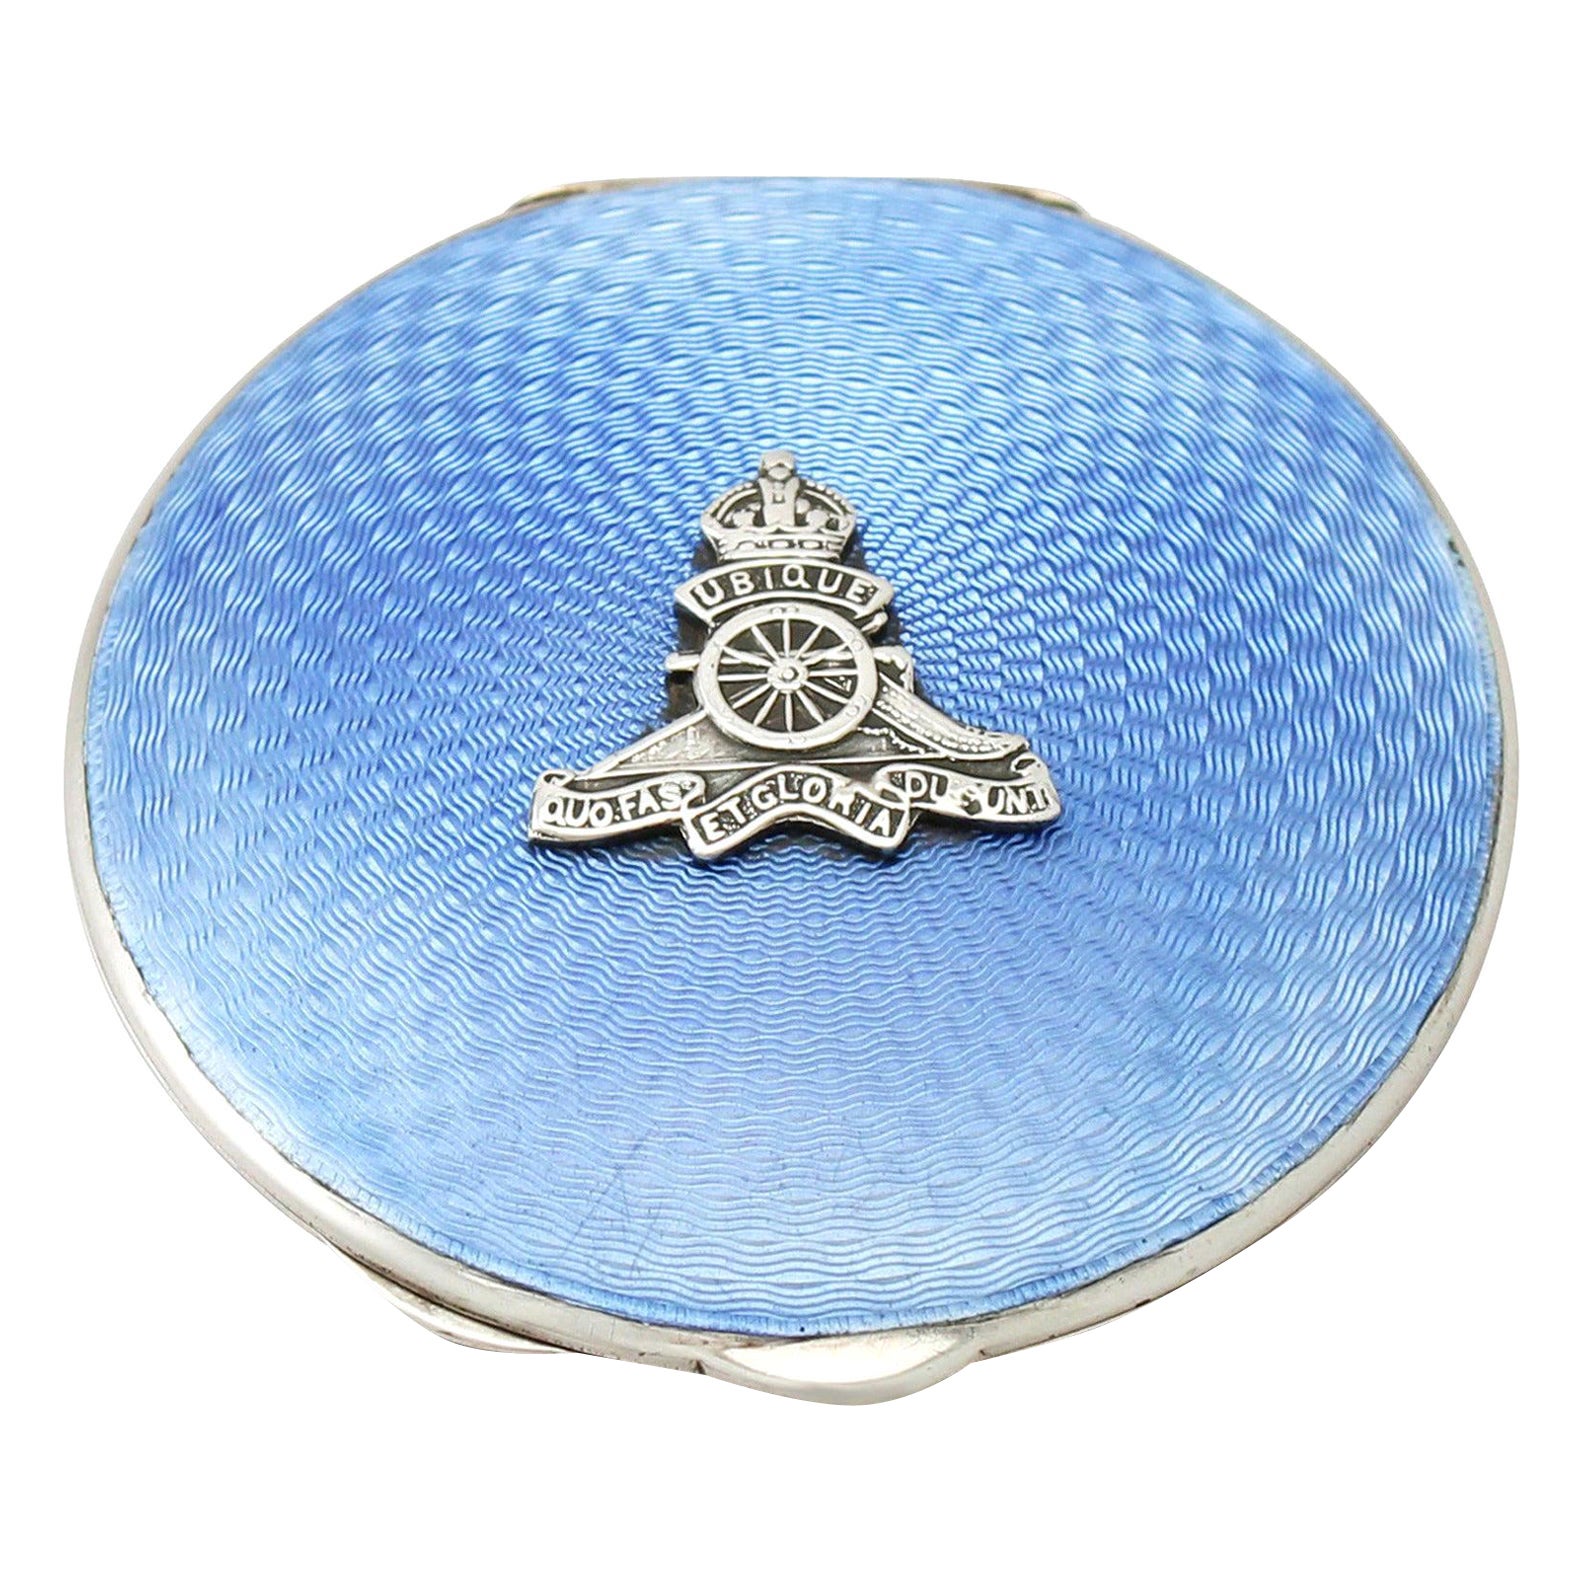 Antique 1939 Sterling Silver and Guilloche Enamel Compact For Sale